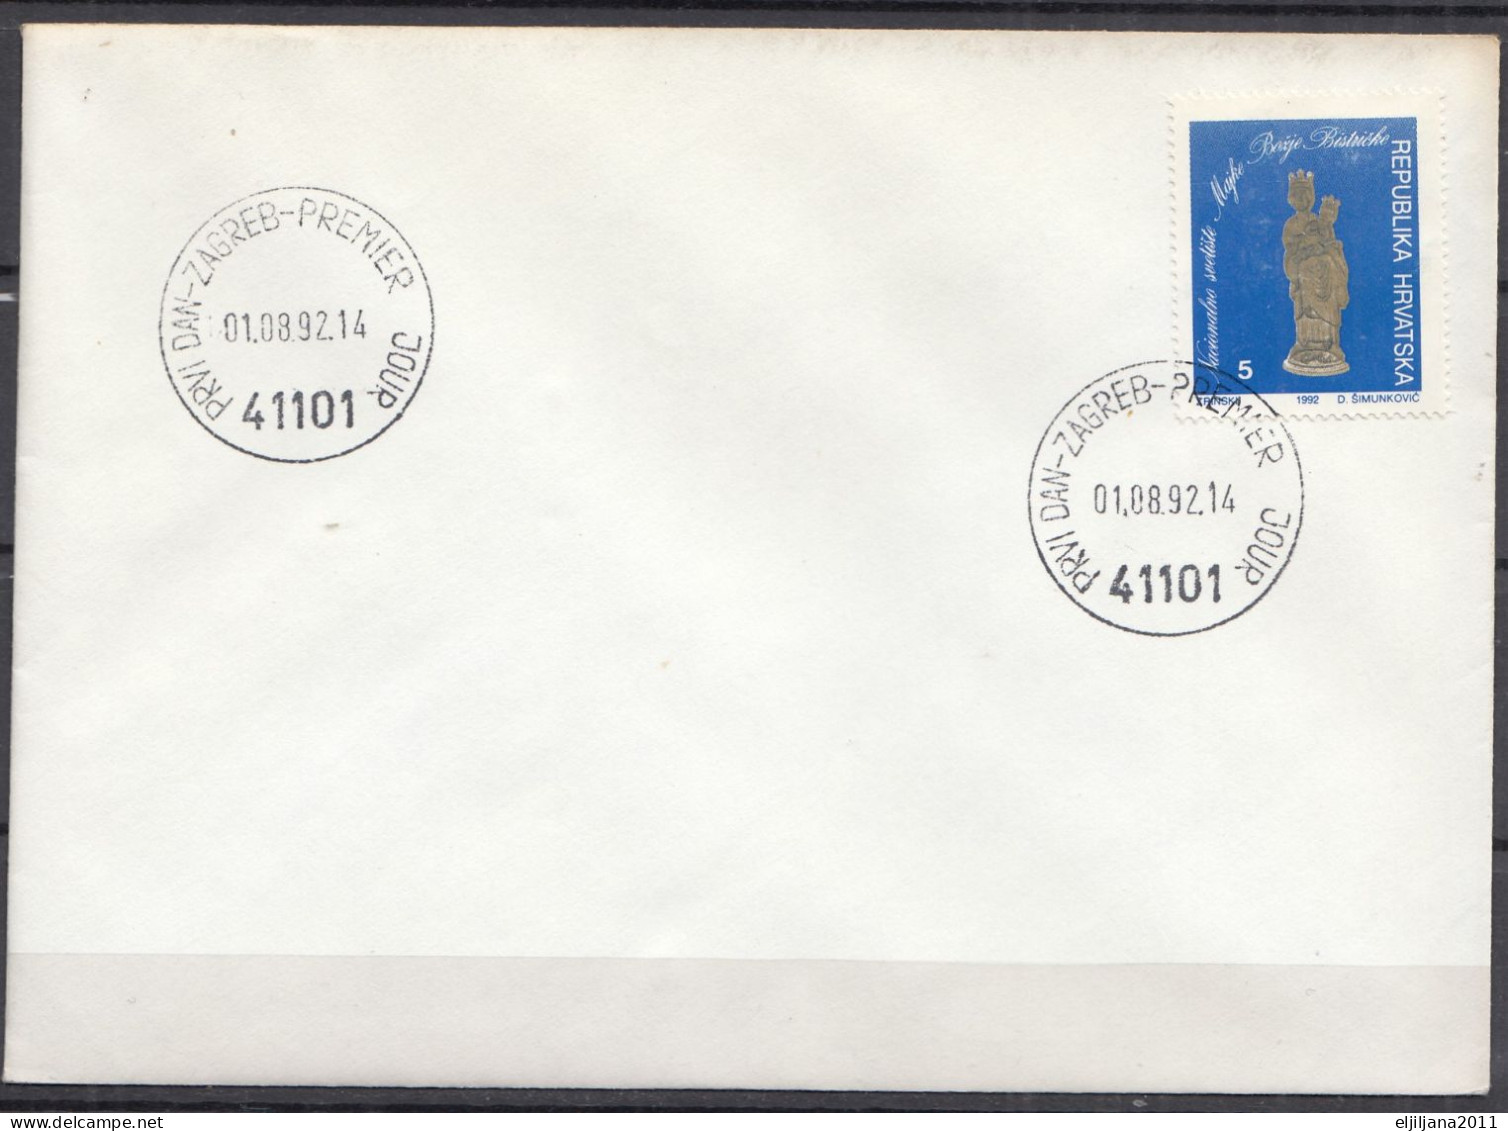 ⁕ CROATIA 1992 Hrvatska ⁕ Charity Stamp, Sanctuary Of Mother Of God Of Bistrica Mi.23 ⁕ First Day Cover / Premier Jour - Croatie